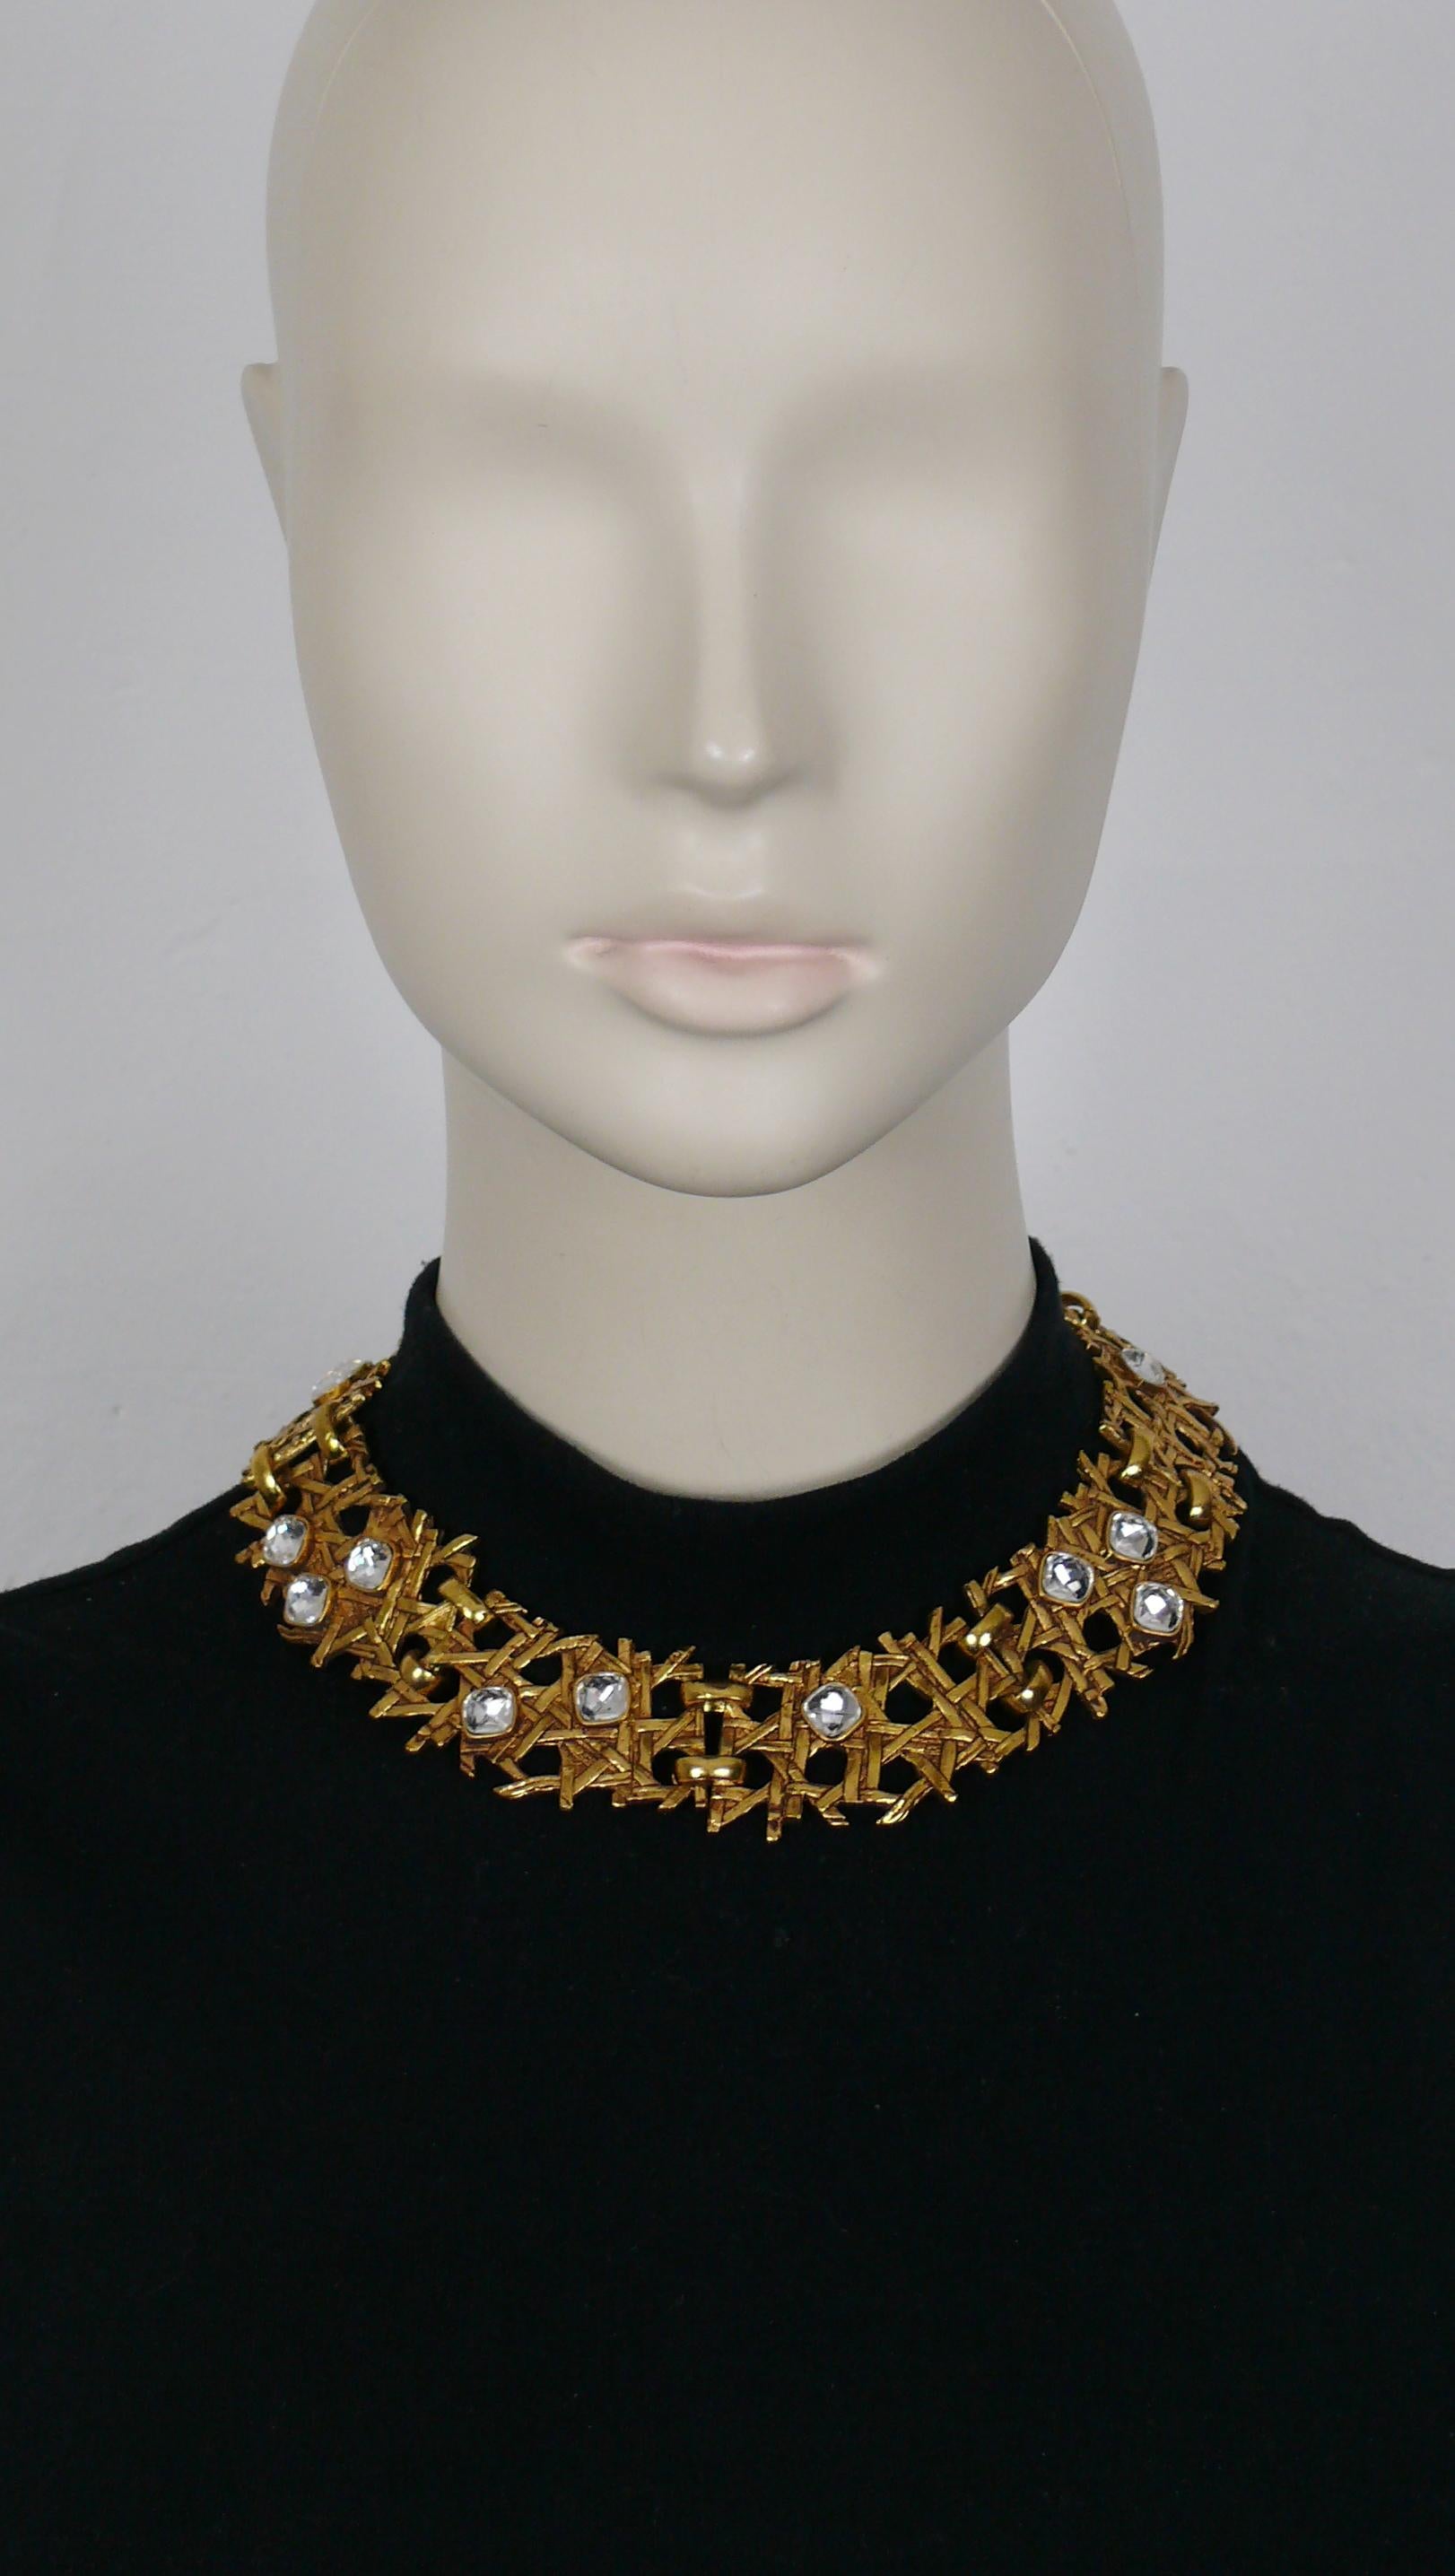 XAVIER LOUBENS vintage antiqued gold tone collar necklace featuring openwork cannage design links embellished with clear crystals.

Adjustable T-bar toggle loop closure.

Marked XAVIER LOUBENS Paris Made in France.

Indicative measurements :